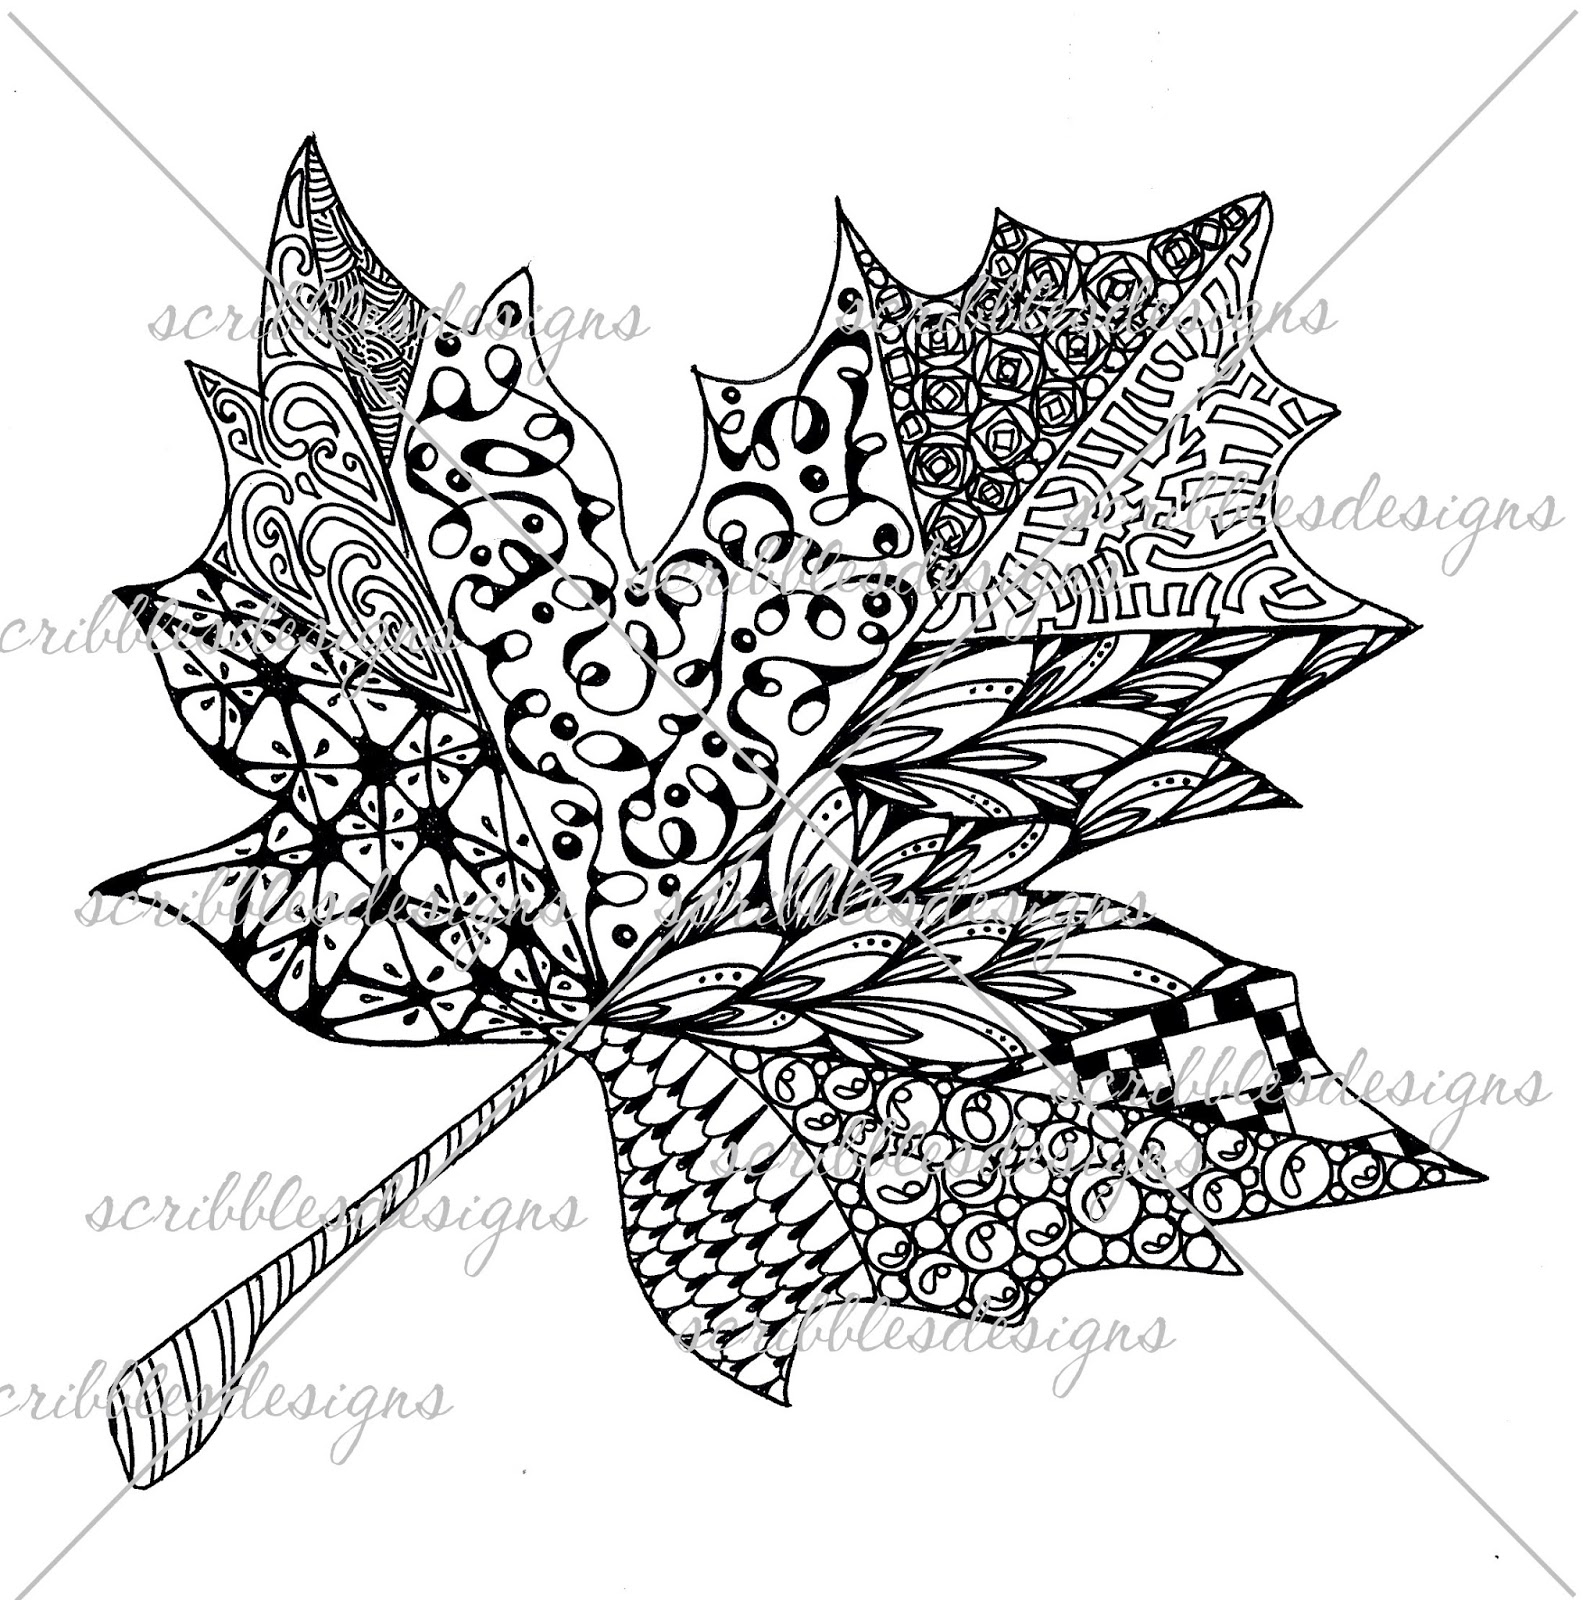 http://buyscribblesdesigns.blogspot.ca/2014/10/a-47-maple-leaf-doodle-400.html